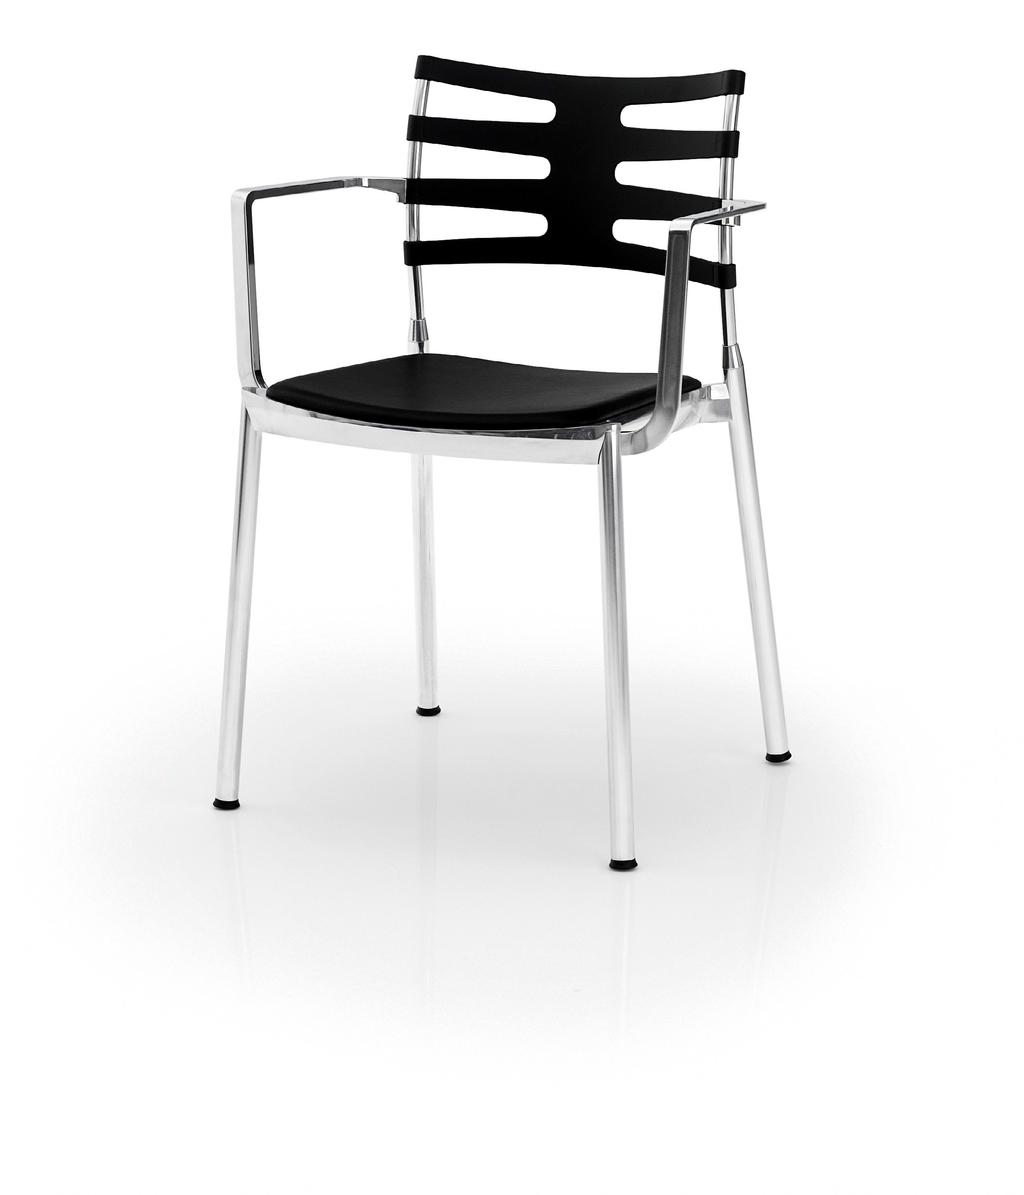 ICE The Ice chair, designed by Kasper Salto, marks a milestone in the history of Fritz Hansen: Ice is the first chair from the hand of Fritz Hansen that is equally suited for both indoor and outdoor